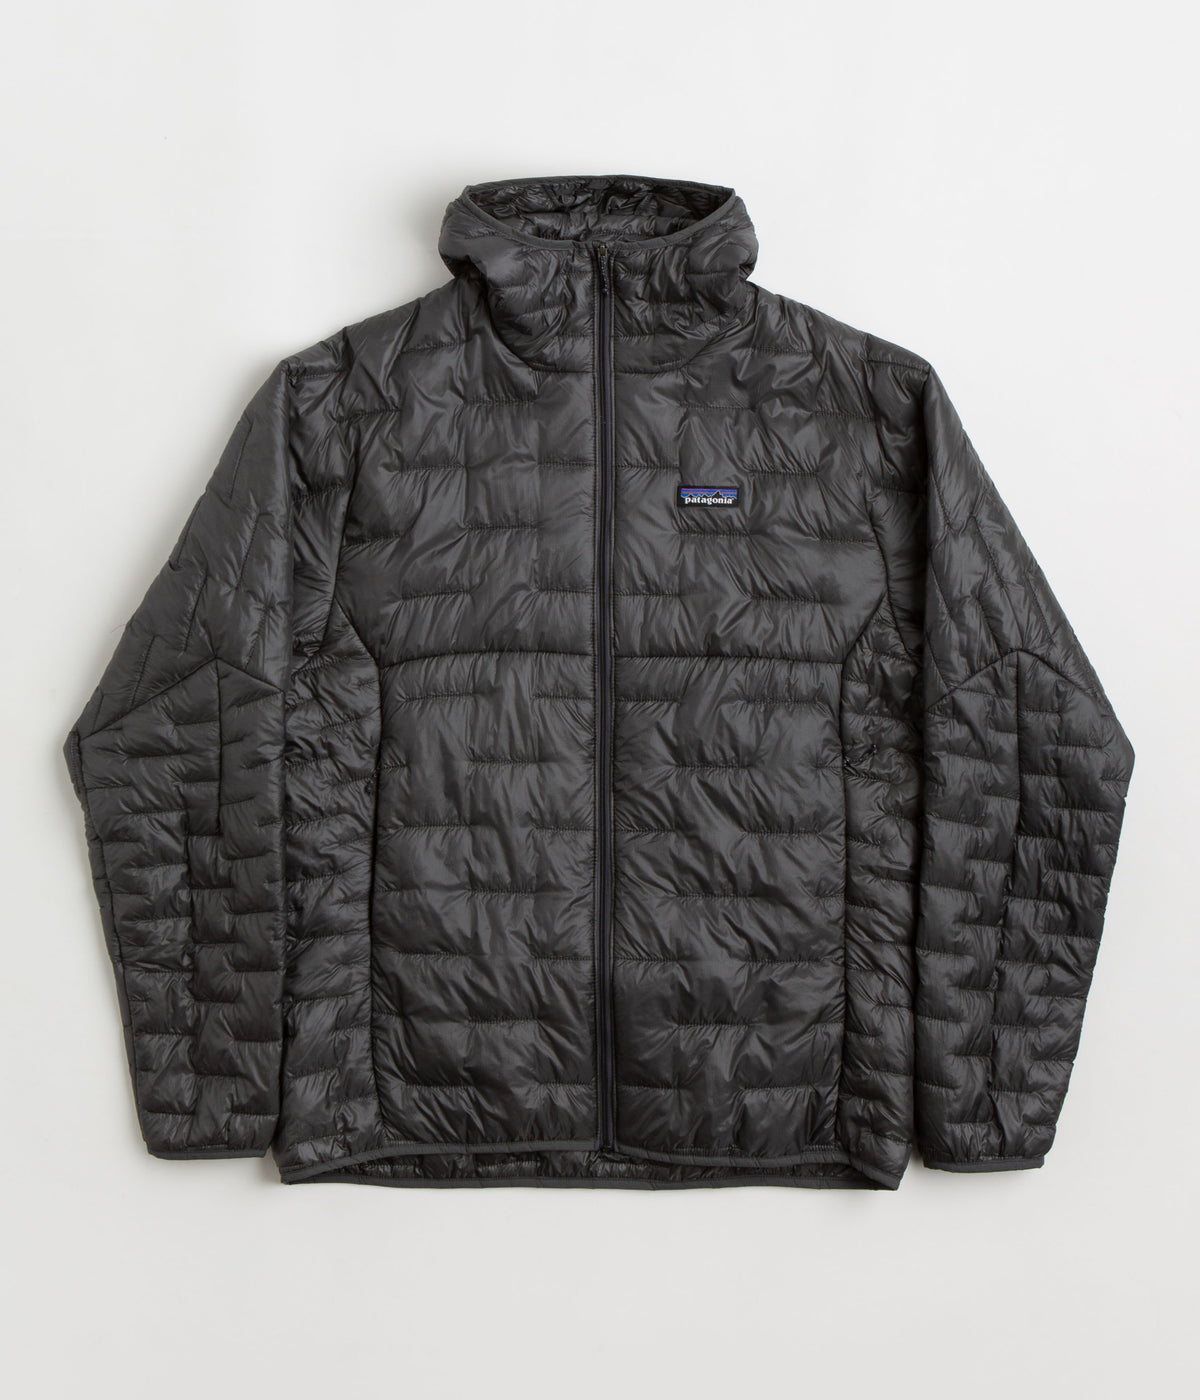 Patagonia Micro Puff Hooded Insulated Jacket - Men's - Clothing